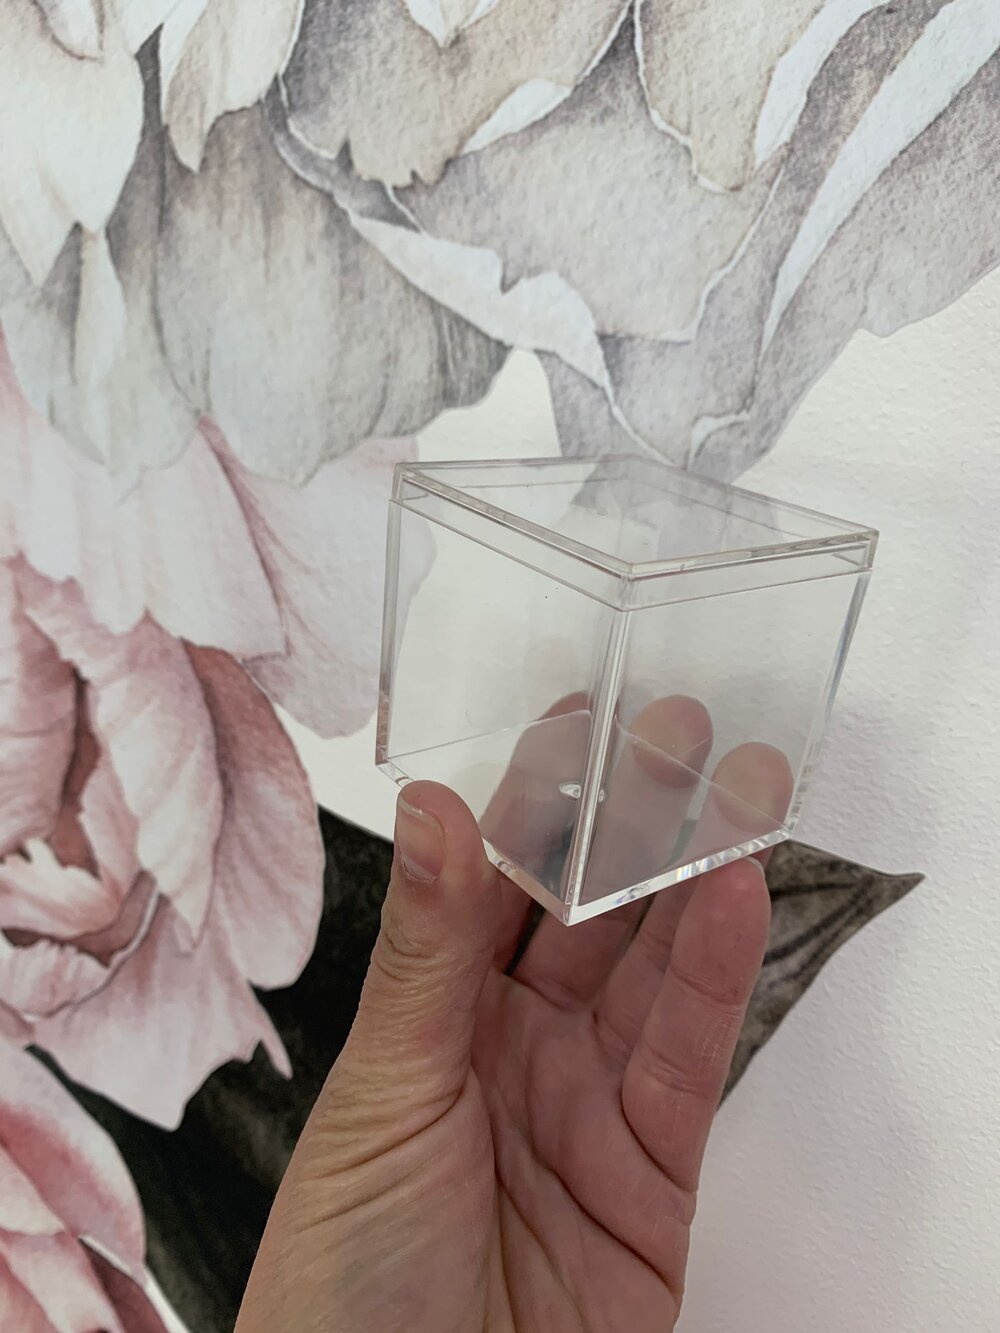 10x Clear Acrylic Small Gift Box with Lids 2X2X2 Inches (Pack of 10)